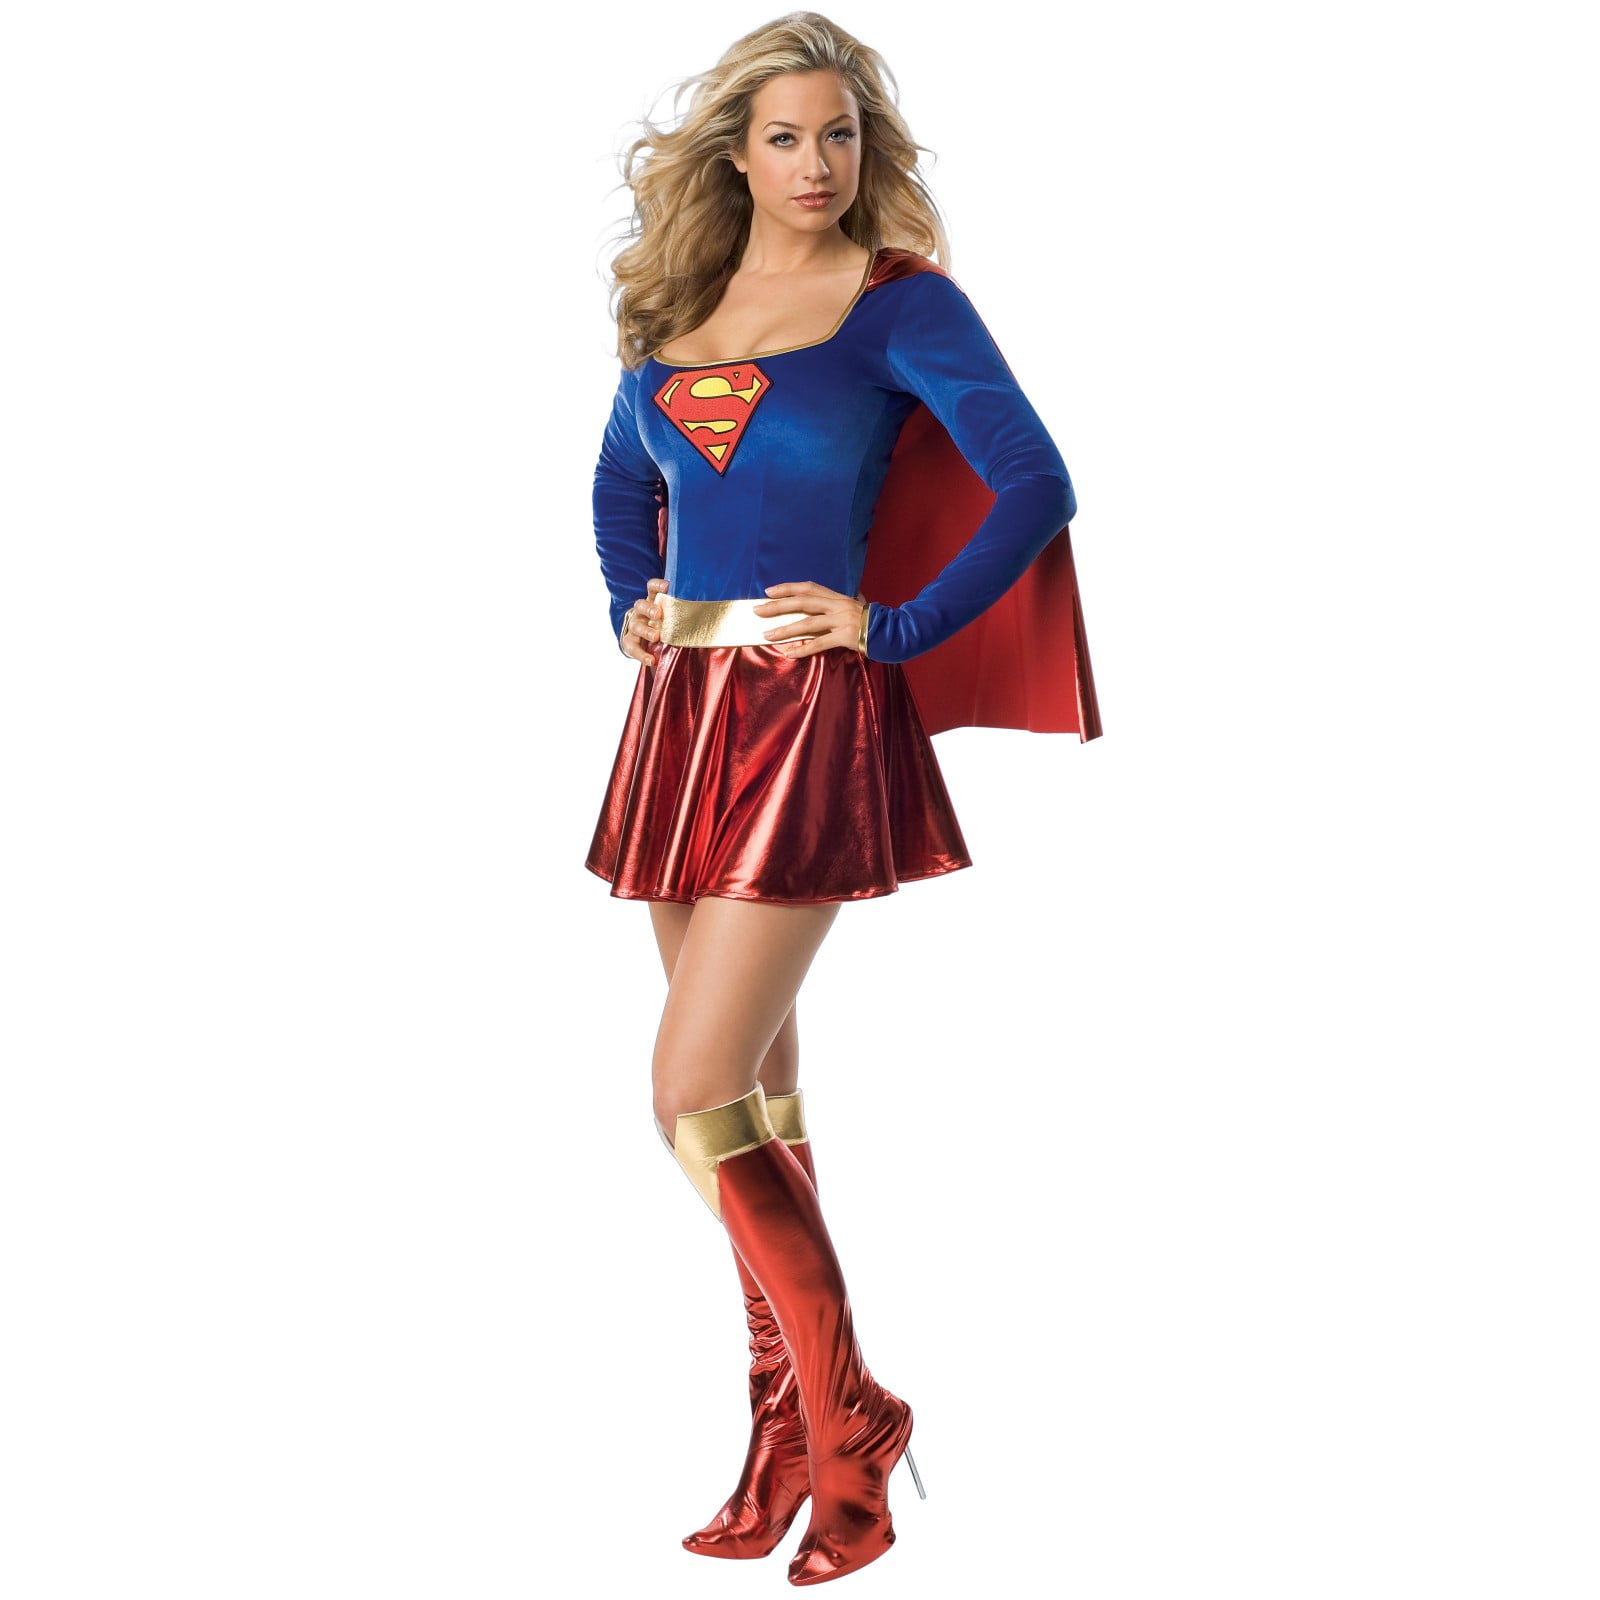 dipesh murarka recommends supergirl sexy pics pic